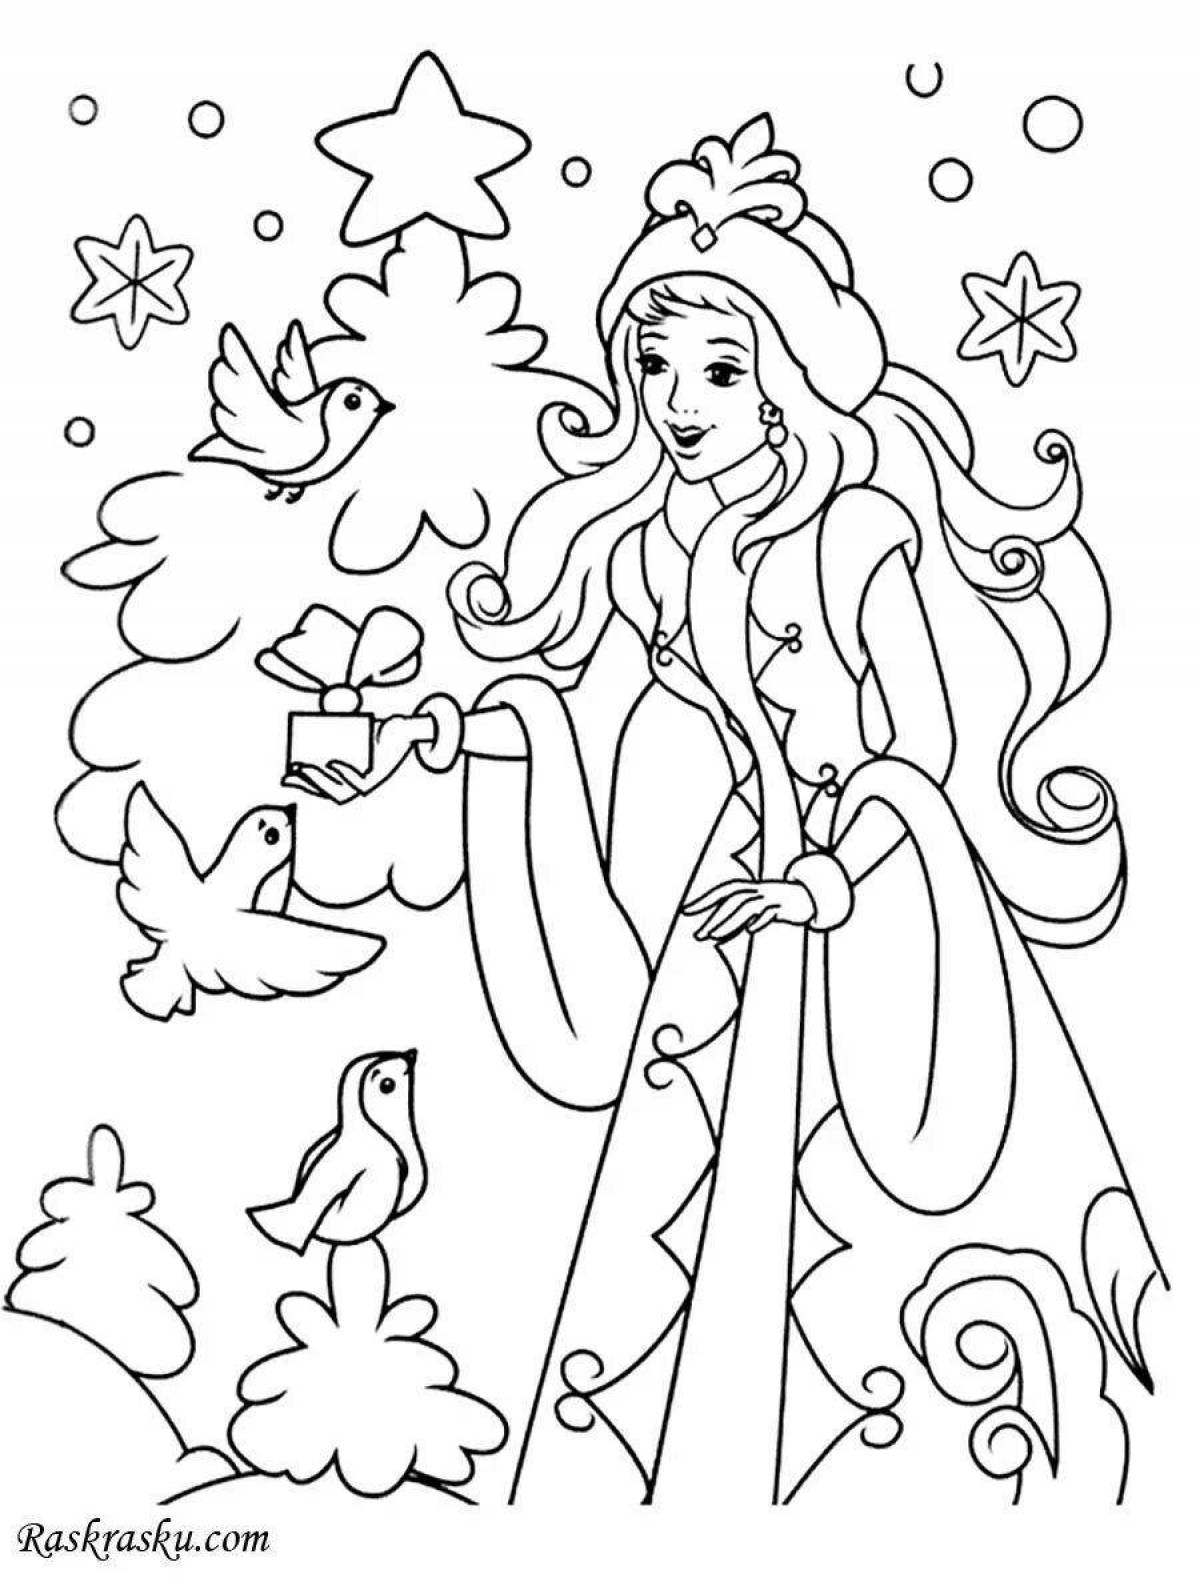 Elegant coloring drawing of a snow maiden